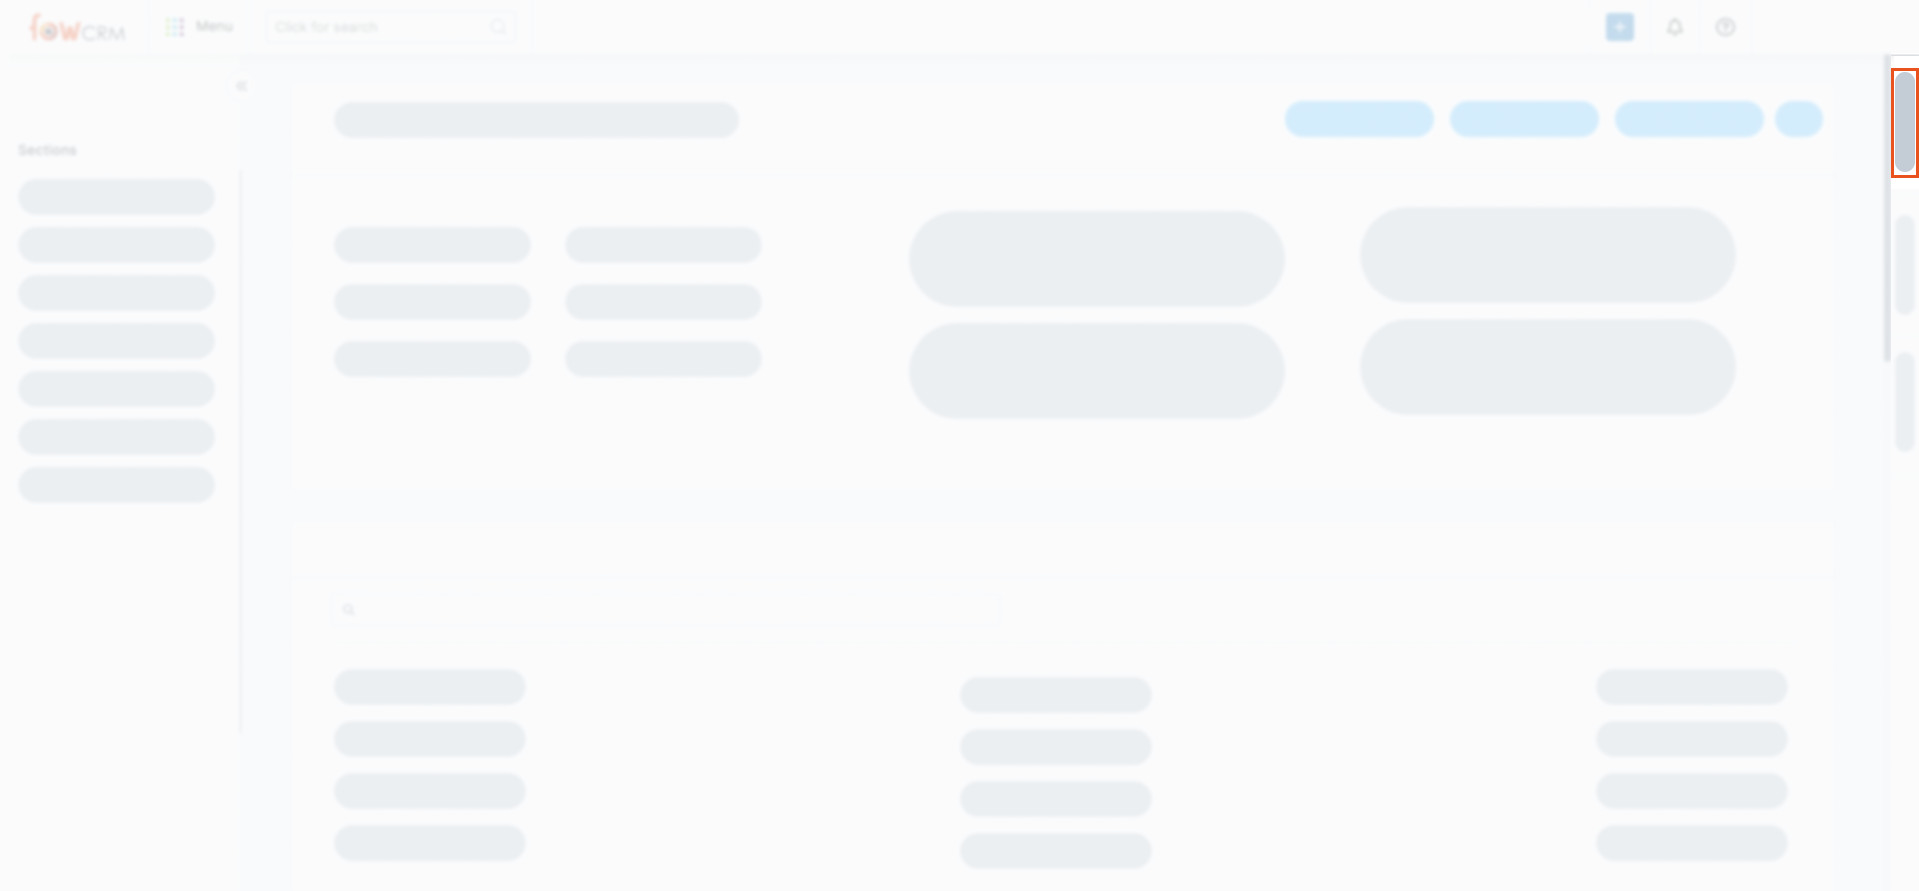 Component Type Pinned Tab